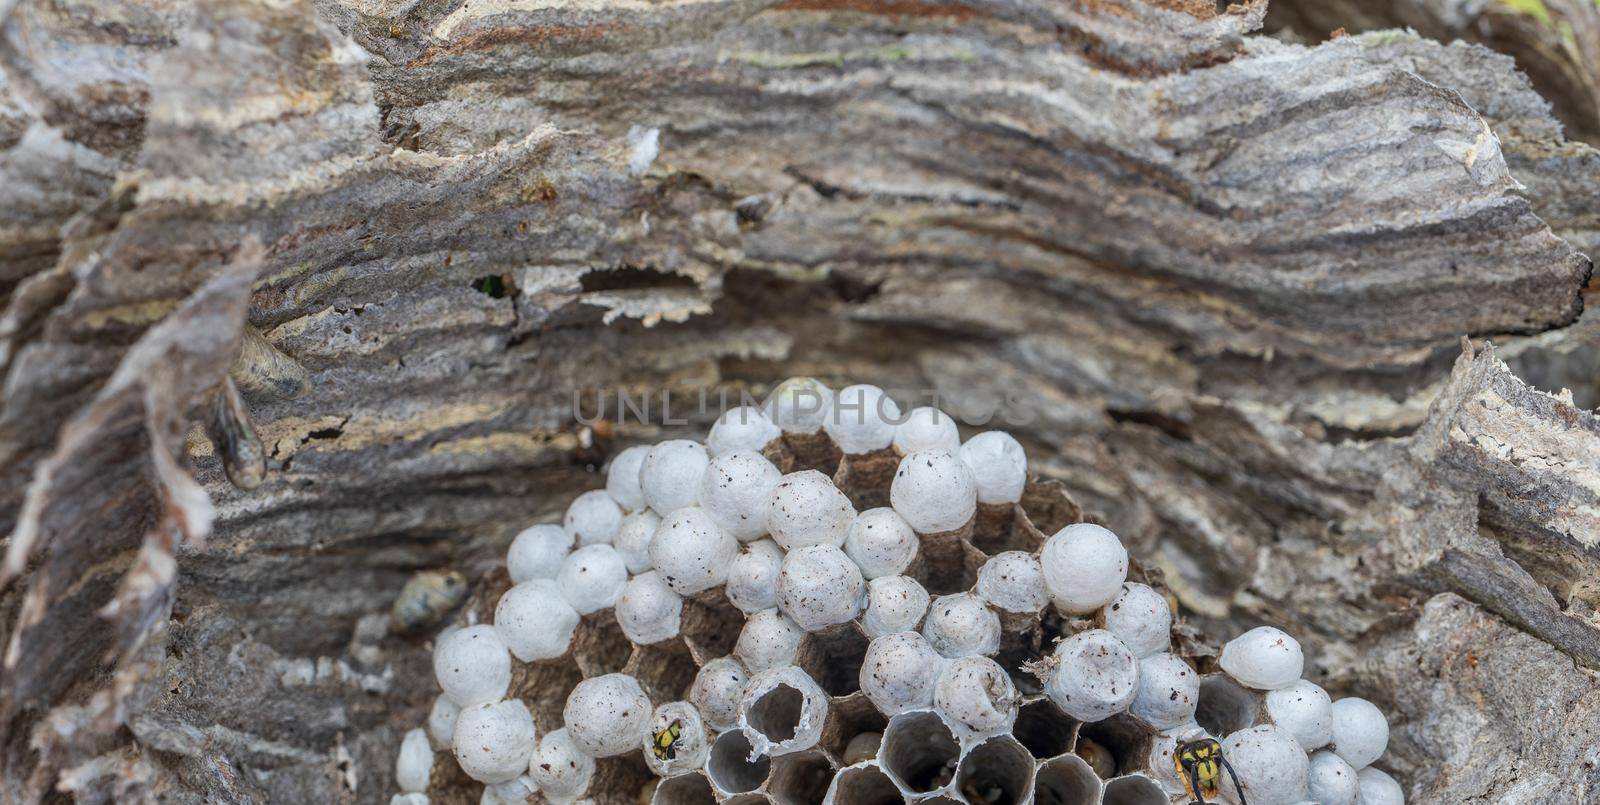 Inside wasp nest with wasps growing